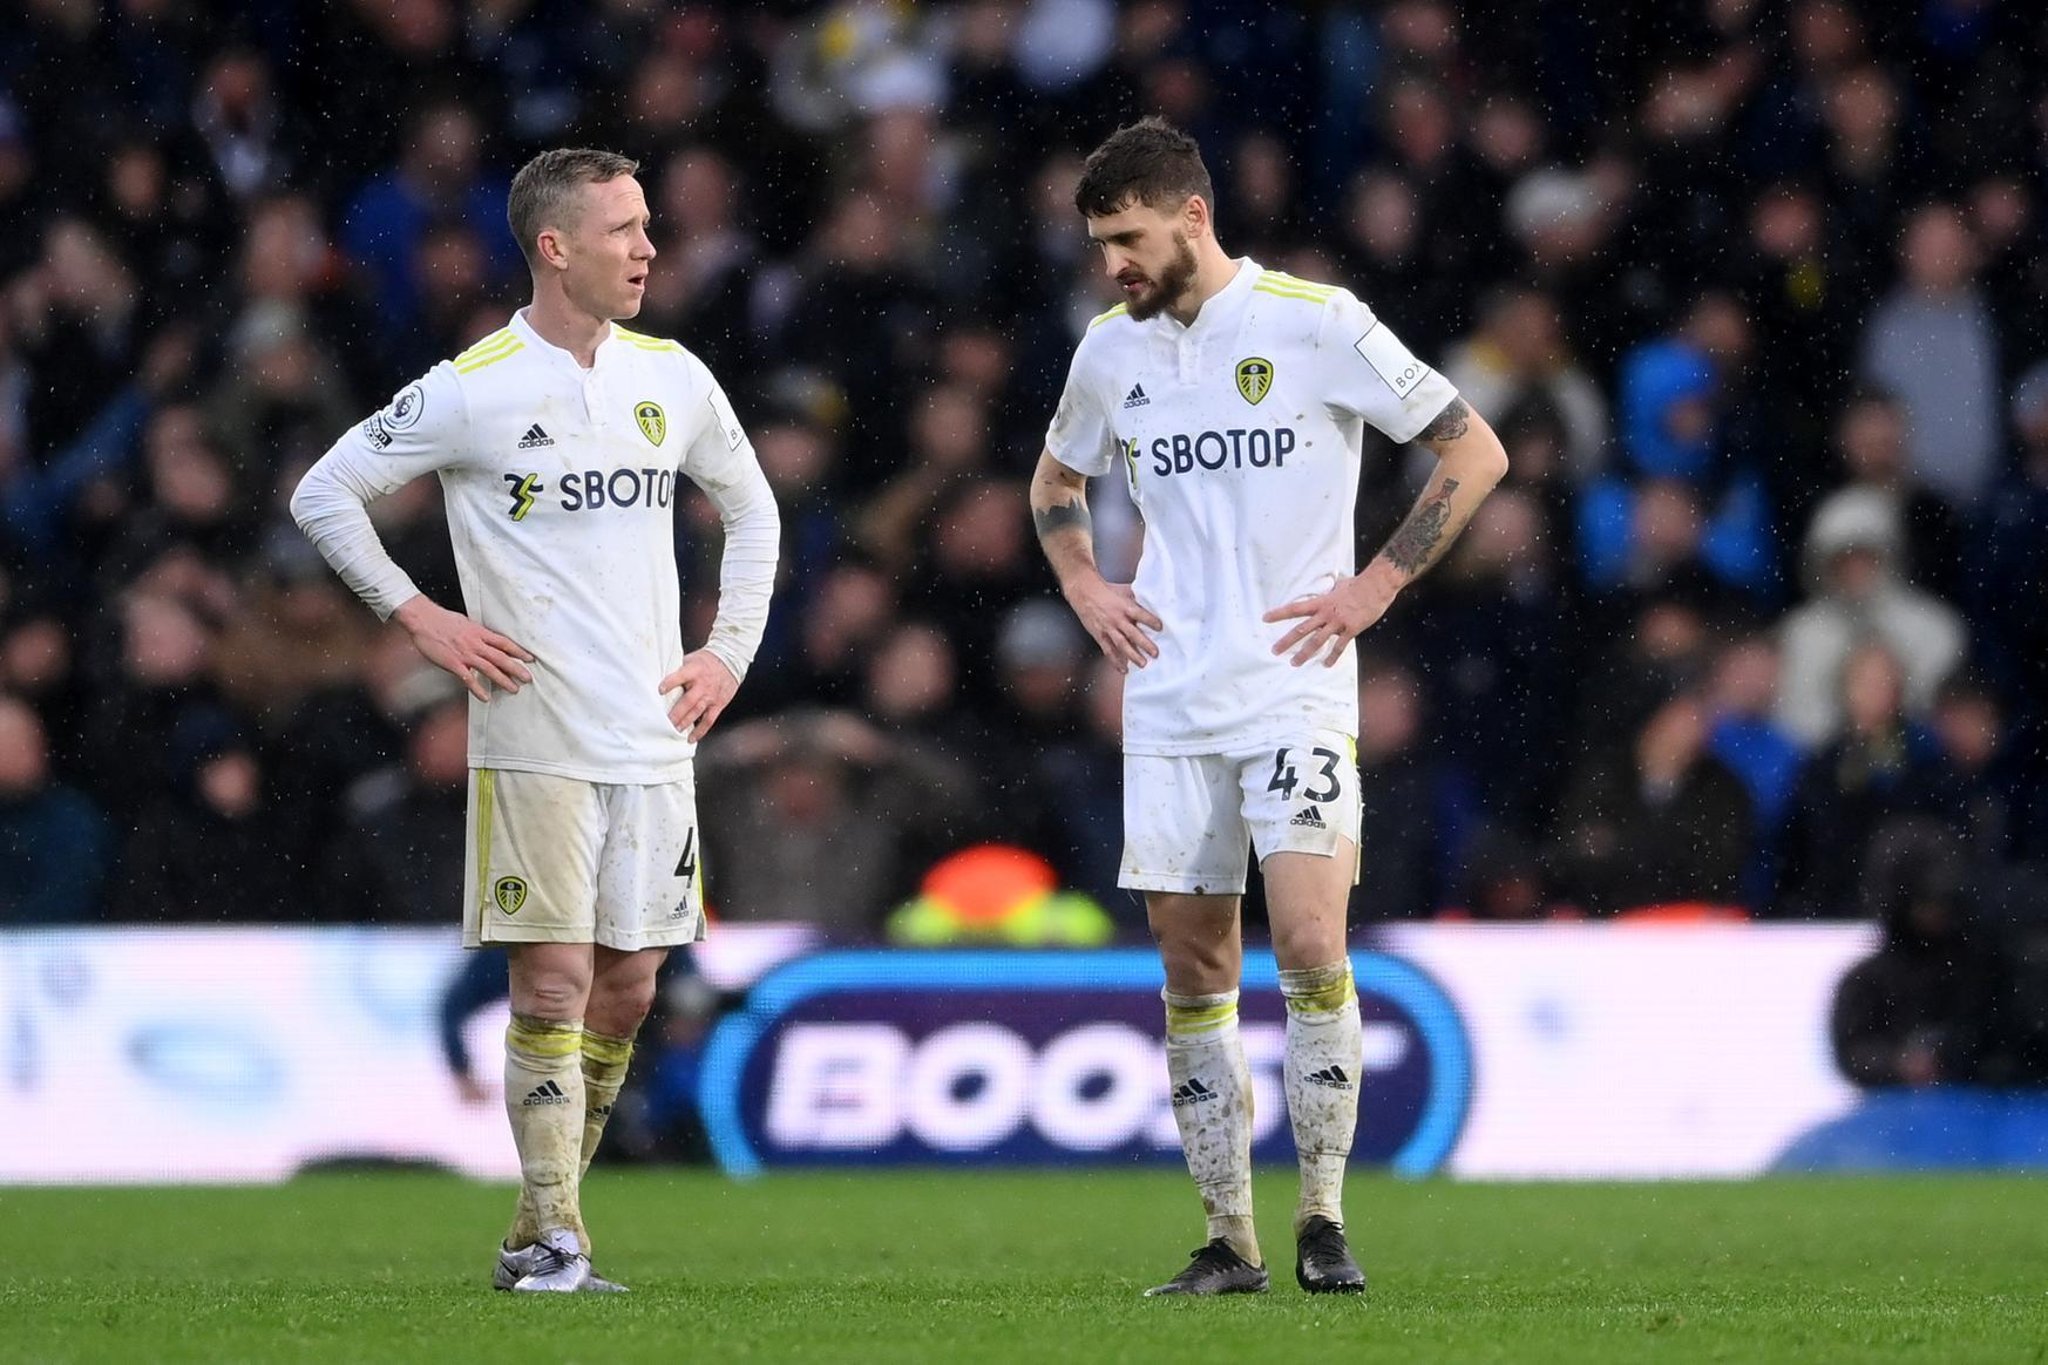 Leeds United 2 - 4 Manchester United - Whites suffer roses derby defeat  despite spirited second-half comeback | Yorkshire Evening Post